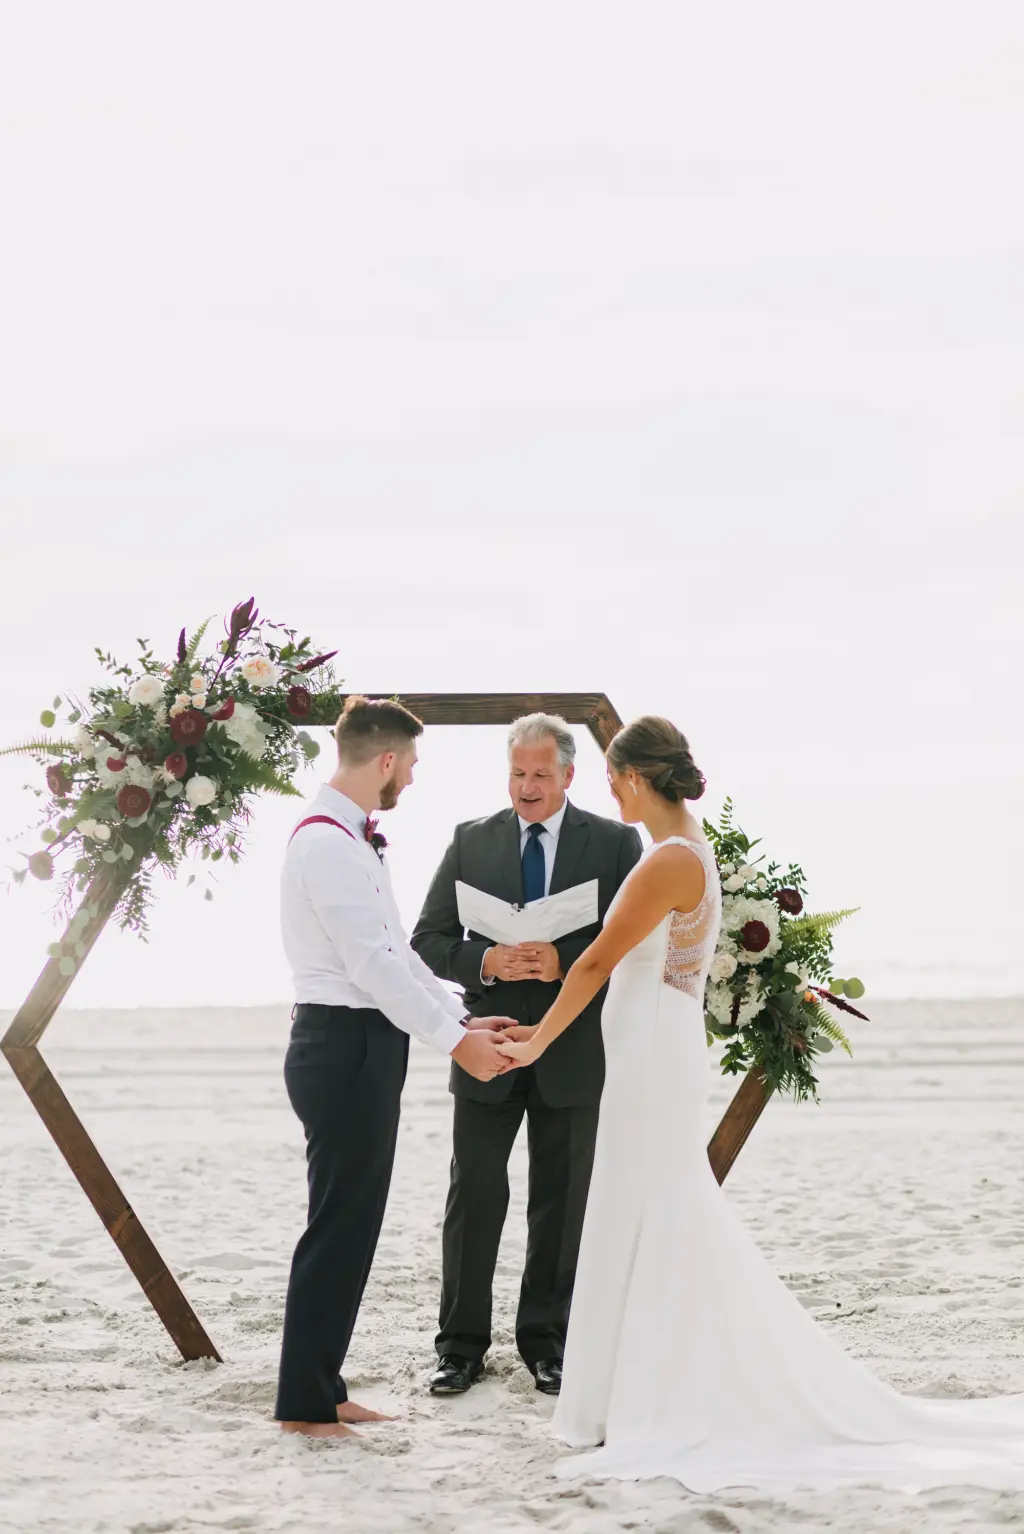 Bride and Groom Vow Exchange | Wooden Hexagon Beach Wedding Ceremony Backdrop with Burgundy Scabiosa, Roses, White Hydrangeas, and Greenery Fall Flower Arrangement Ideas | St Petersburg Photographer Amber McWhorter Photography | Planner Elope Tampa Bay